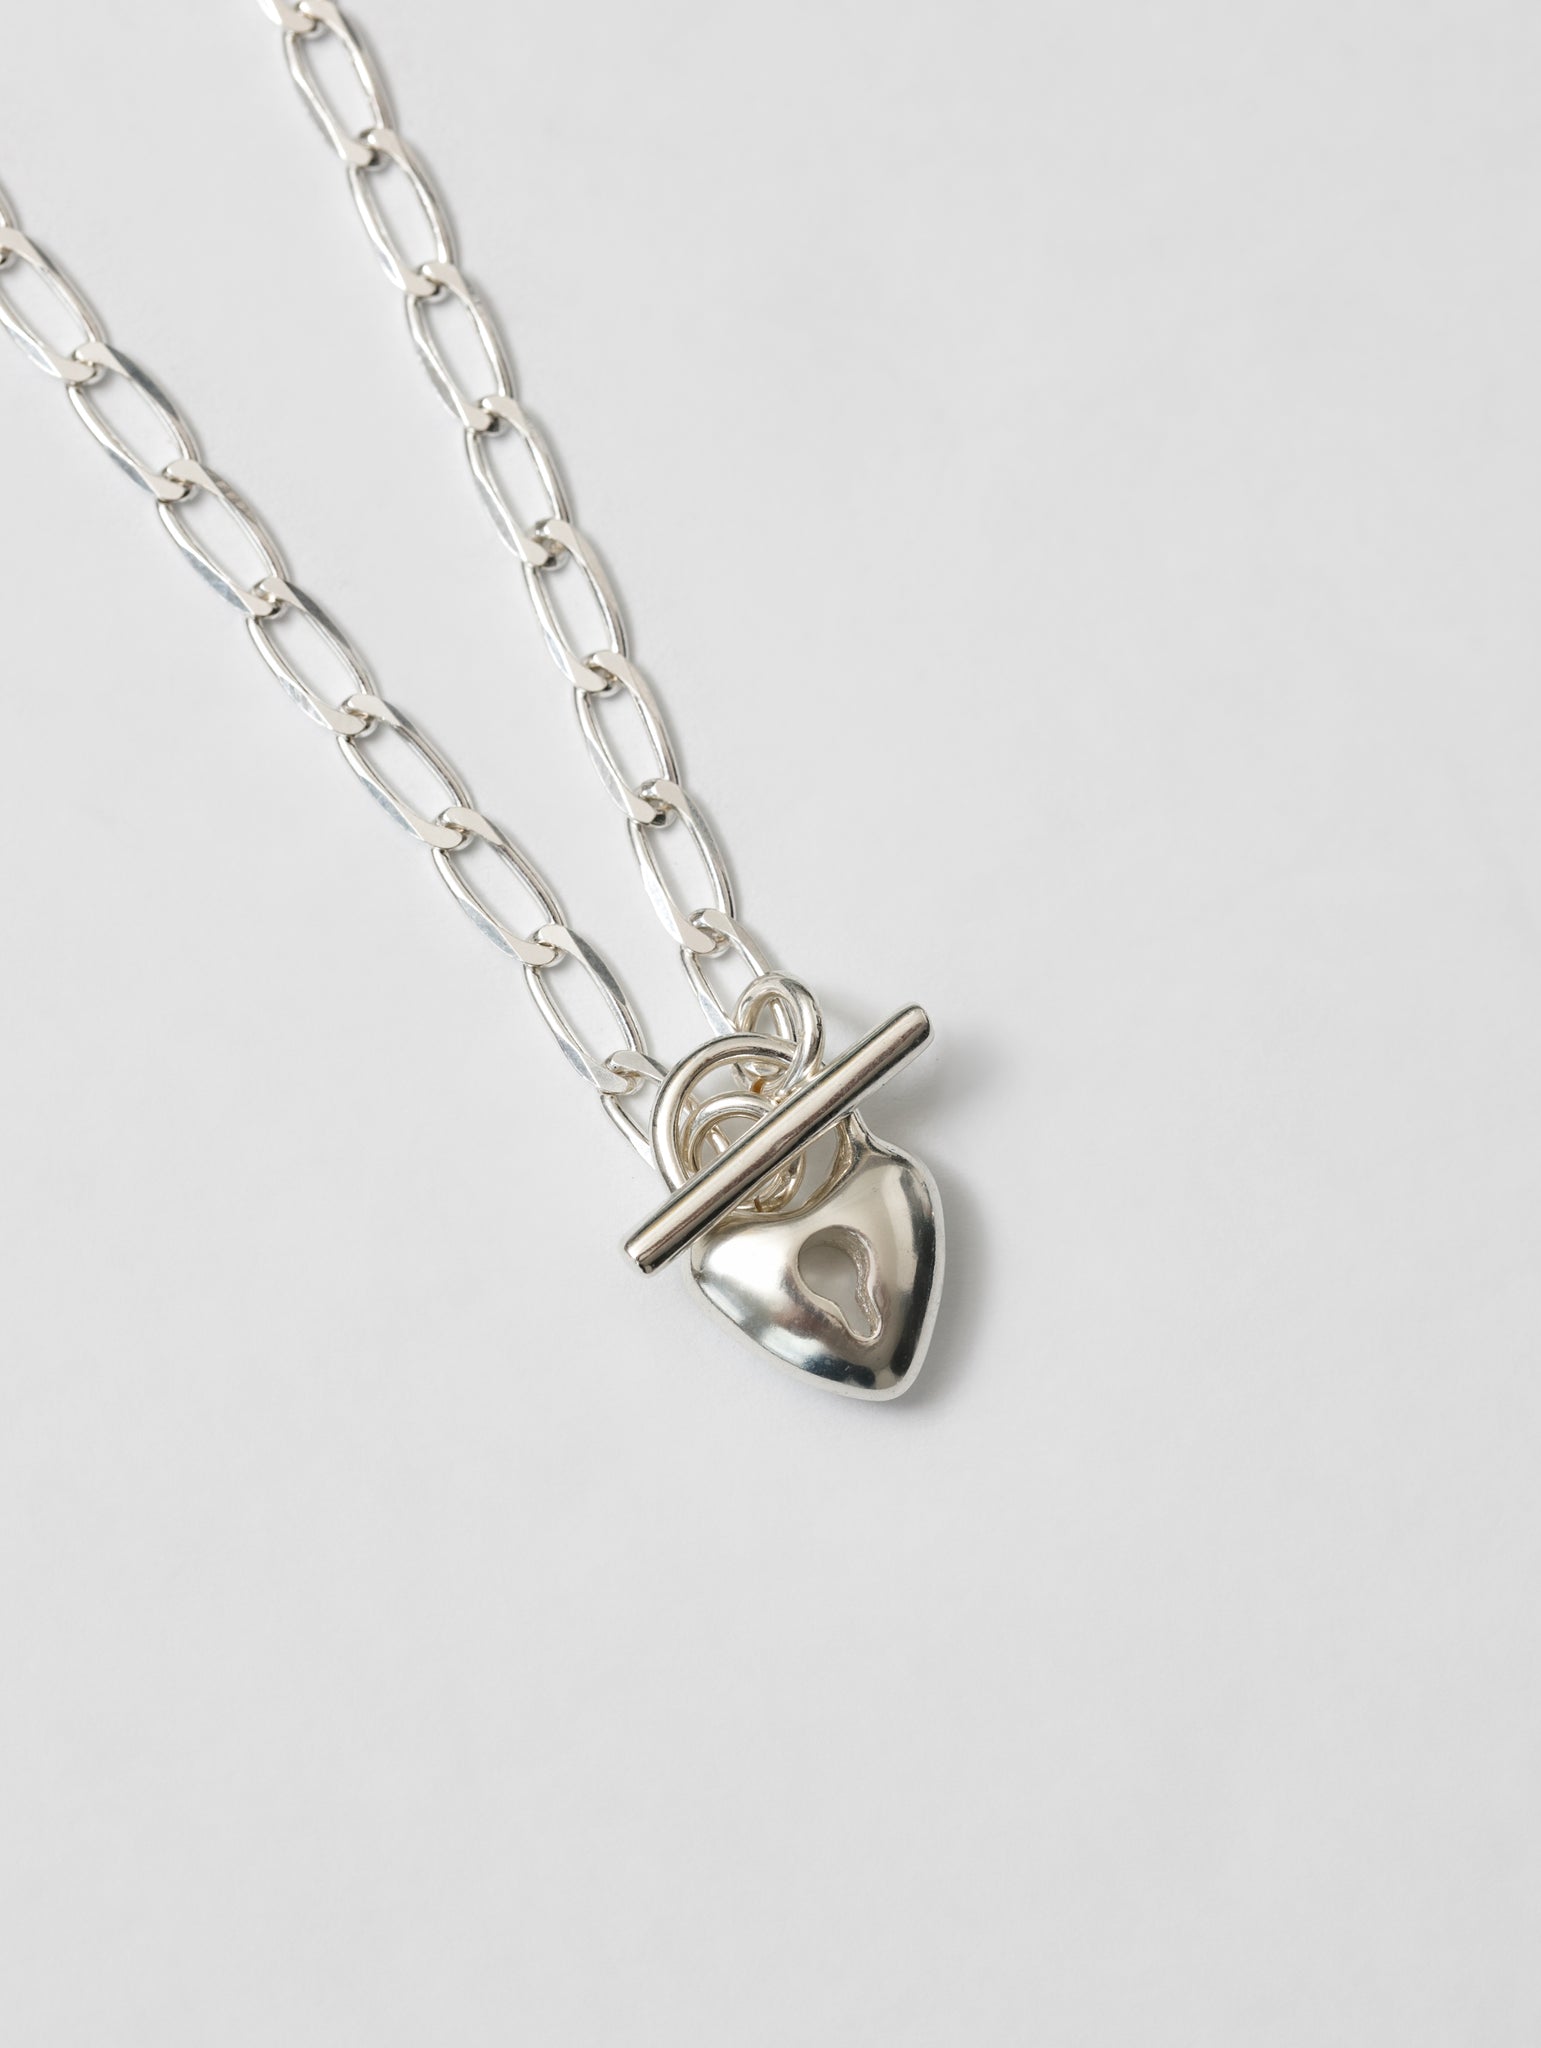 Wolf Circus Heart Locket Toggle Clasp Curb Chain Necklace in 925 Sterling Silver-Necklaces-17.5"-wolfcircus.com